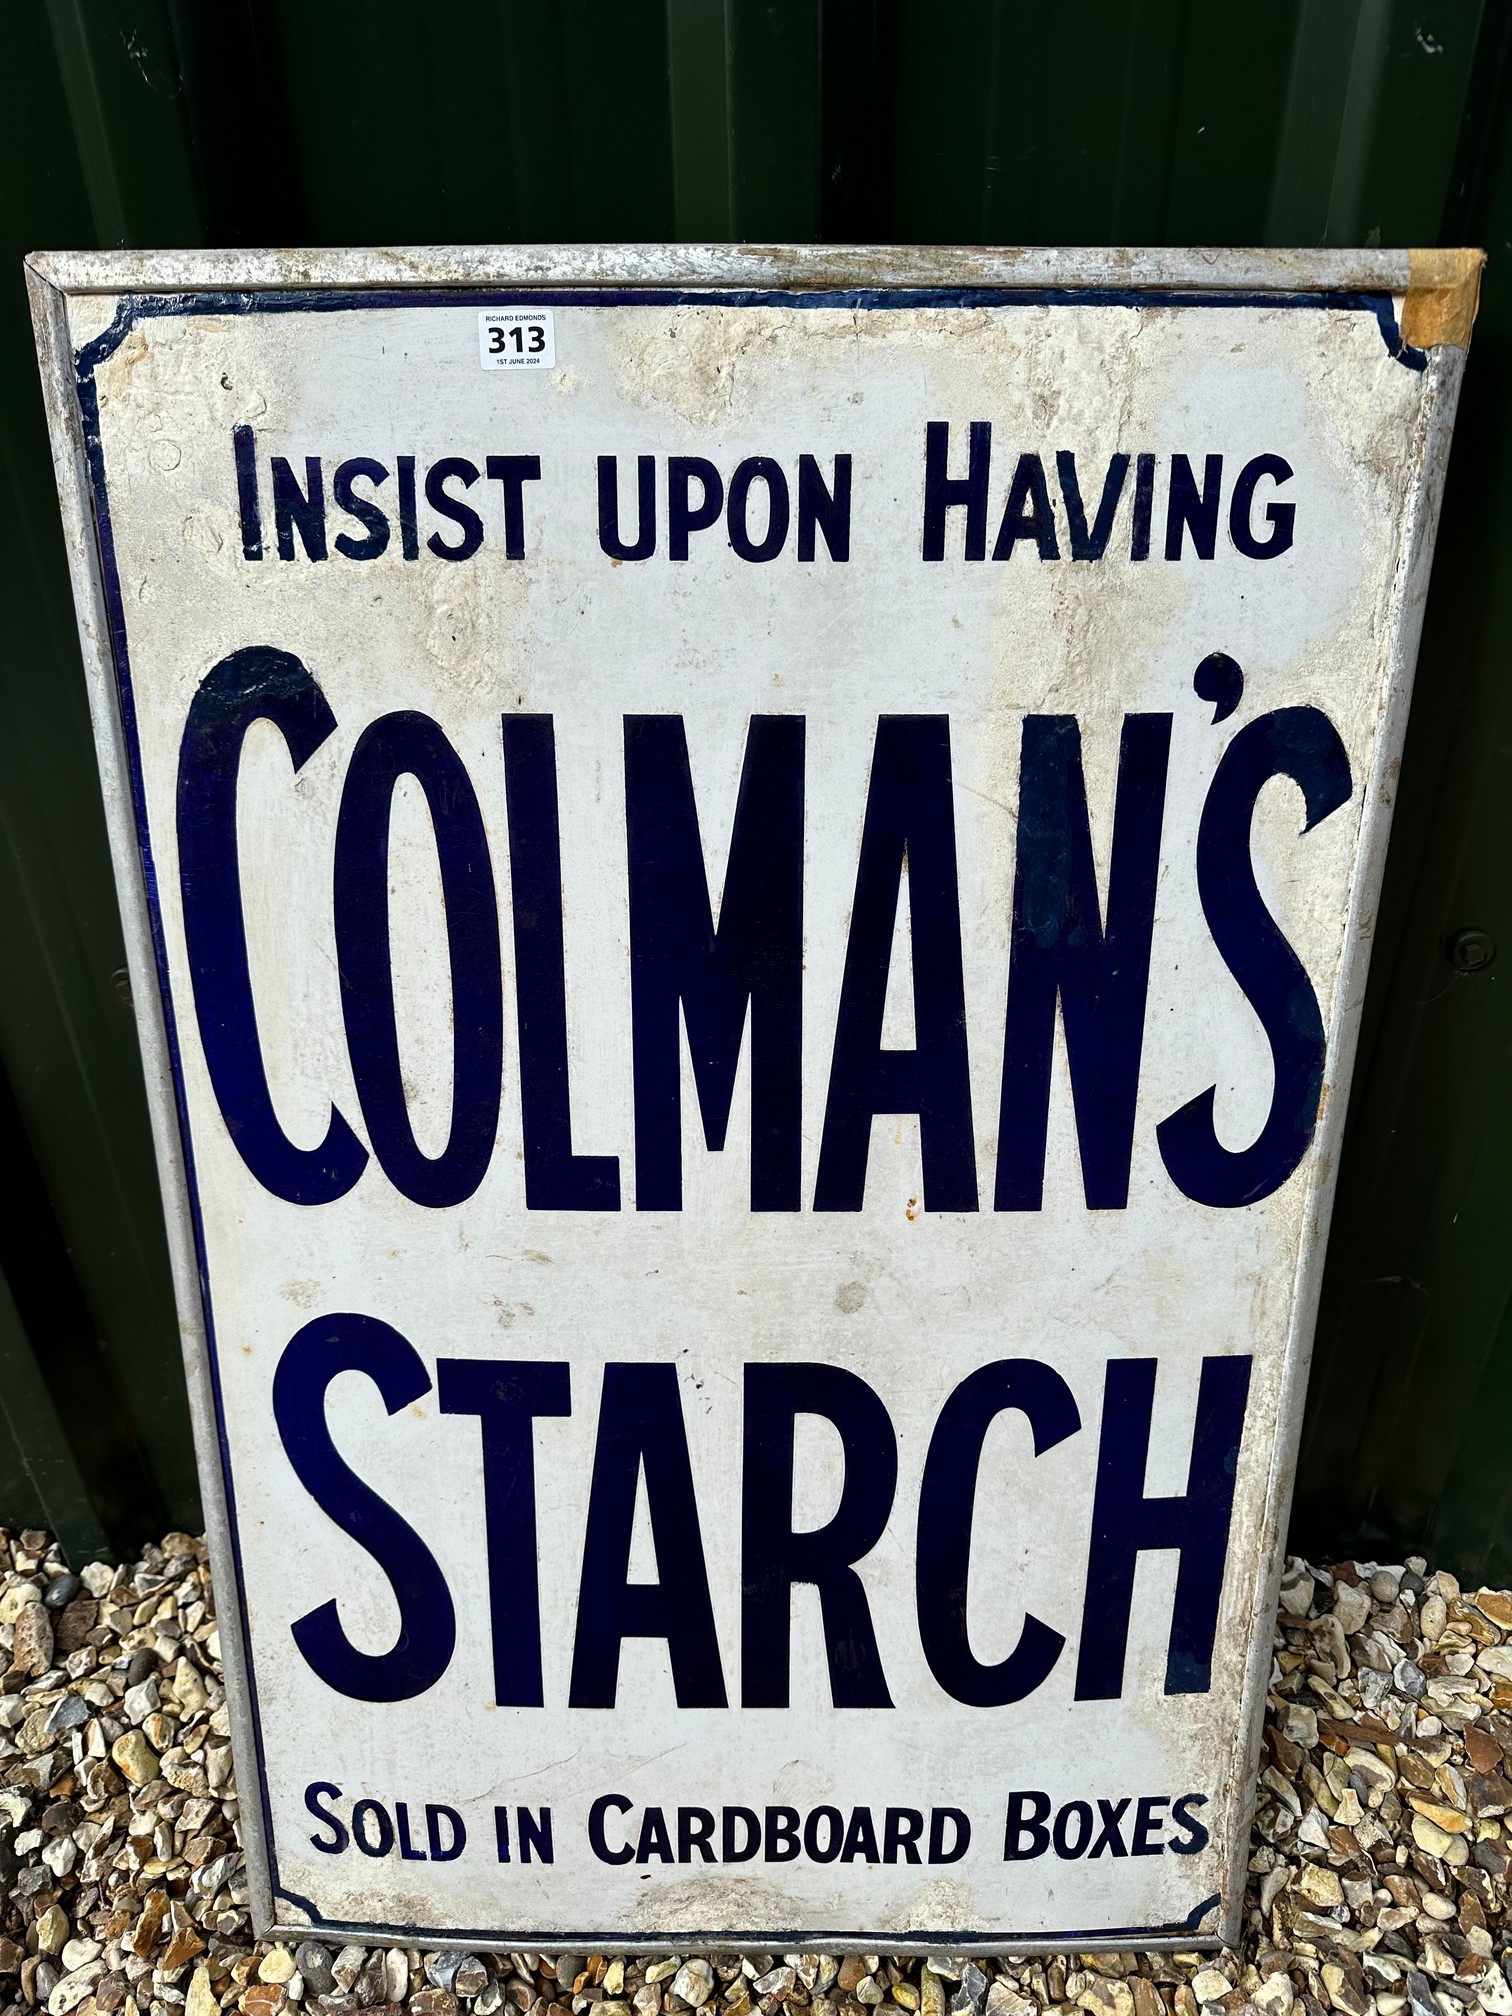 A Colman's Starch Sold in Cardboard Boxes enamel advertising sign set within metal frame, amateur